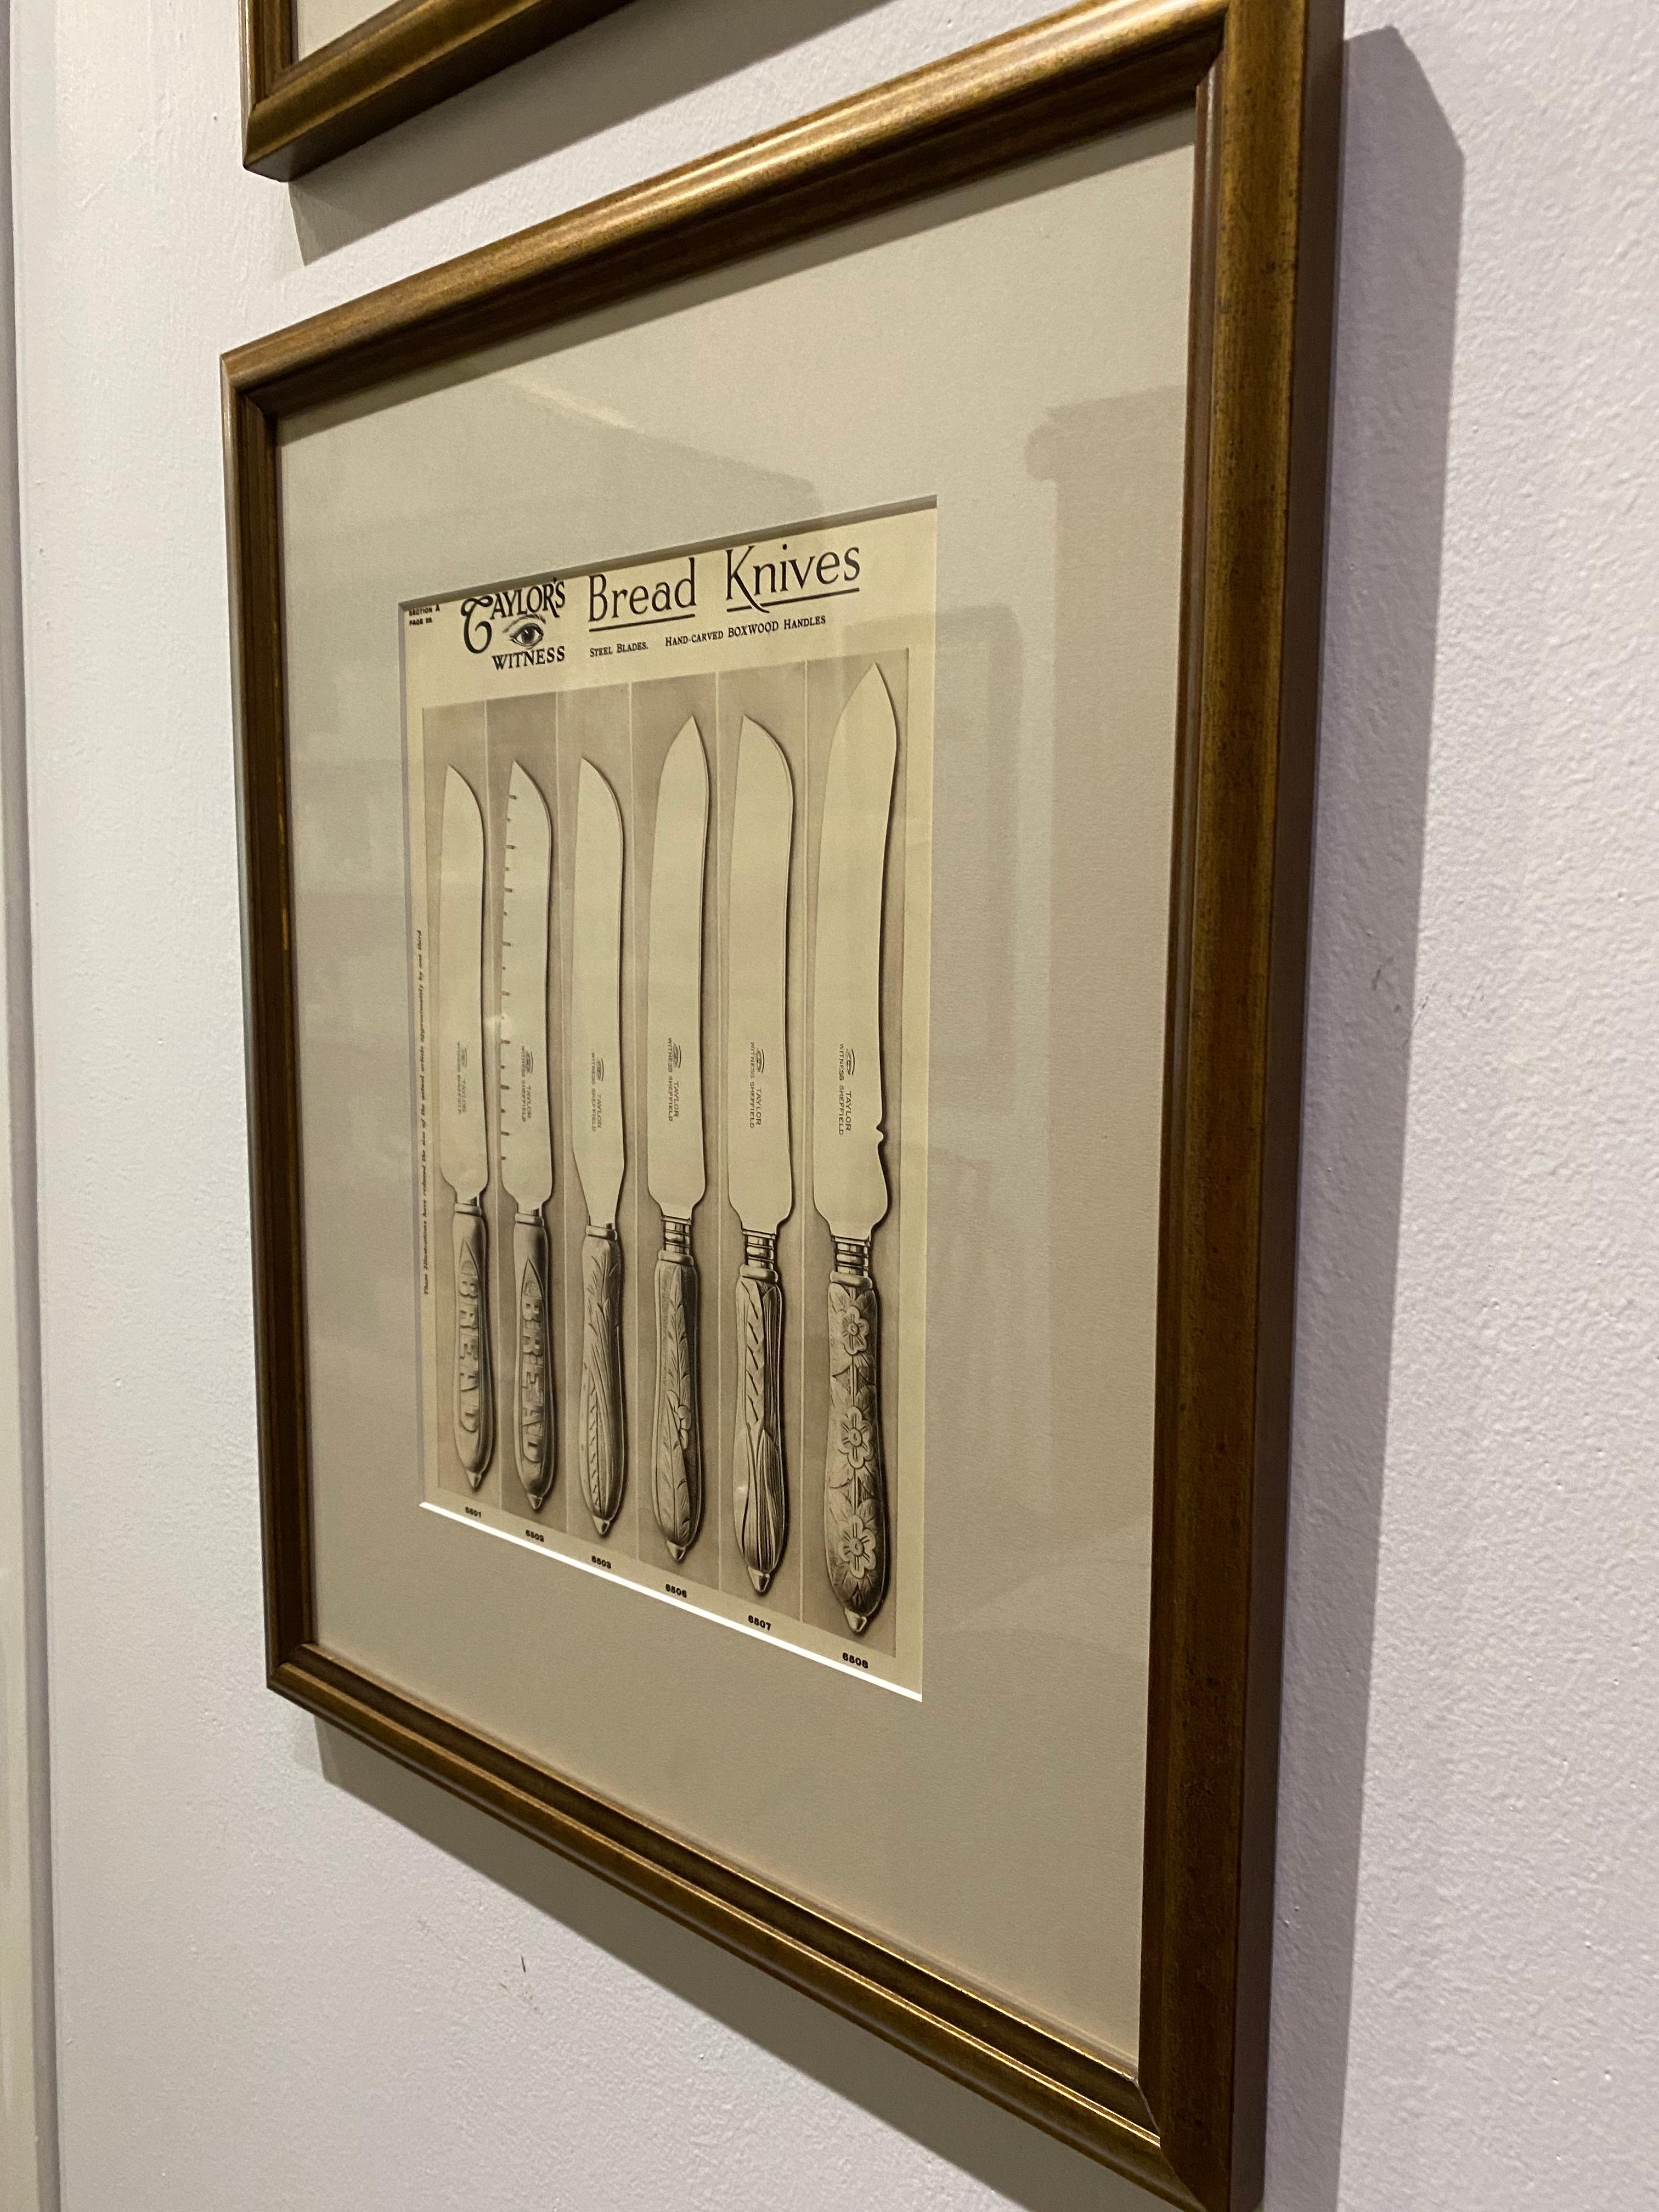 Vintage drawing of bread knives matted and framed in a new wood frame.